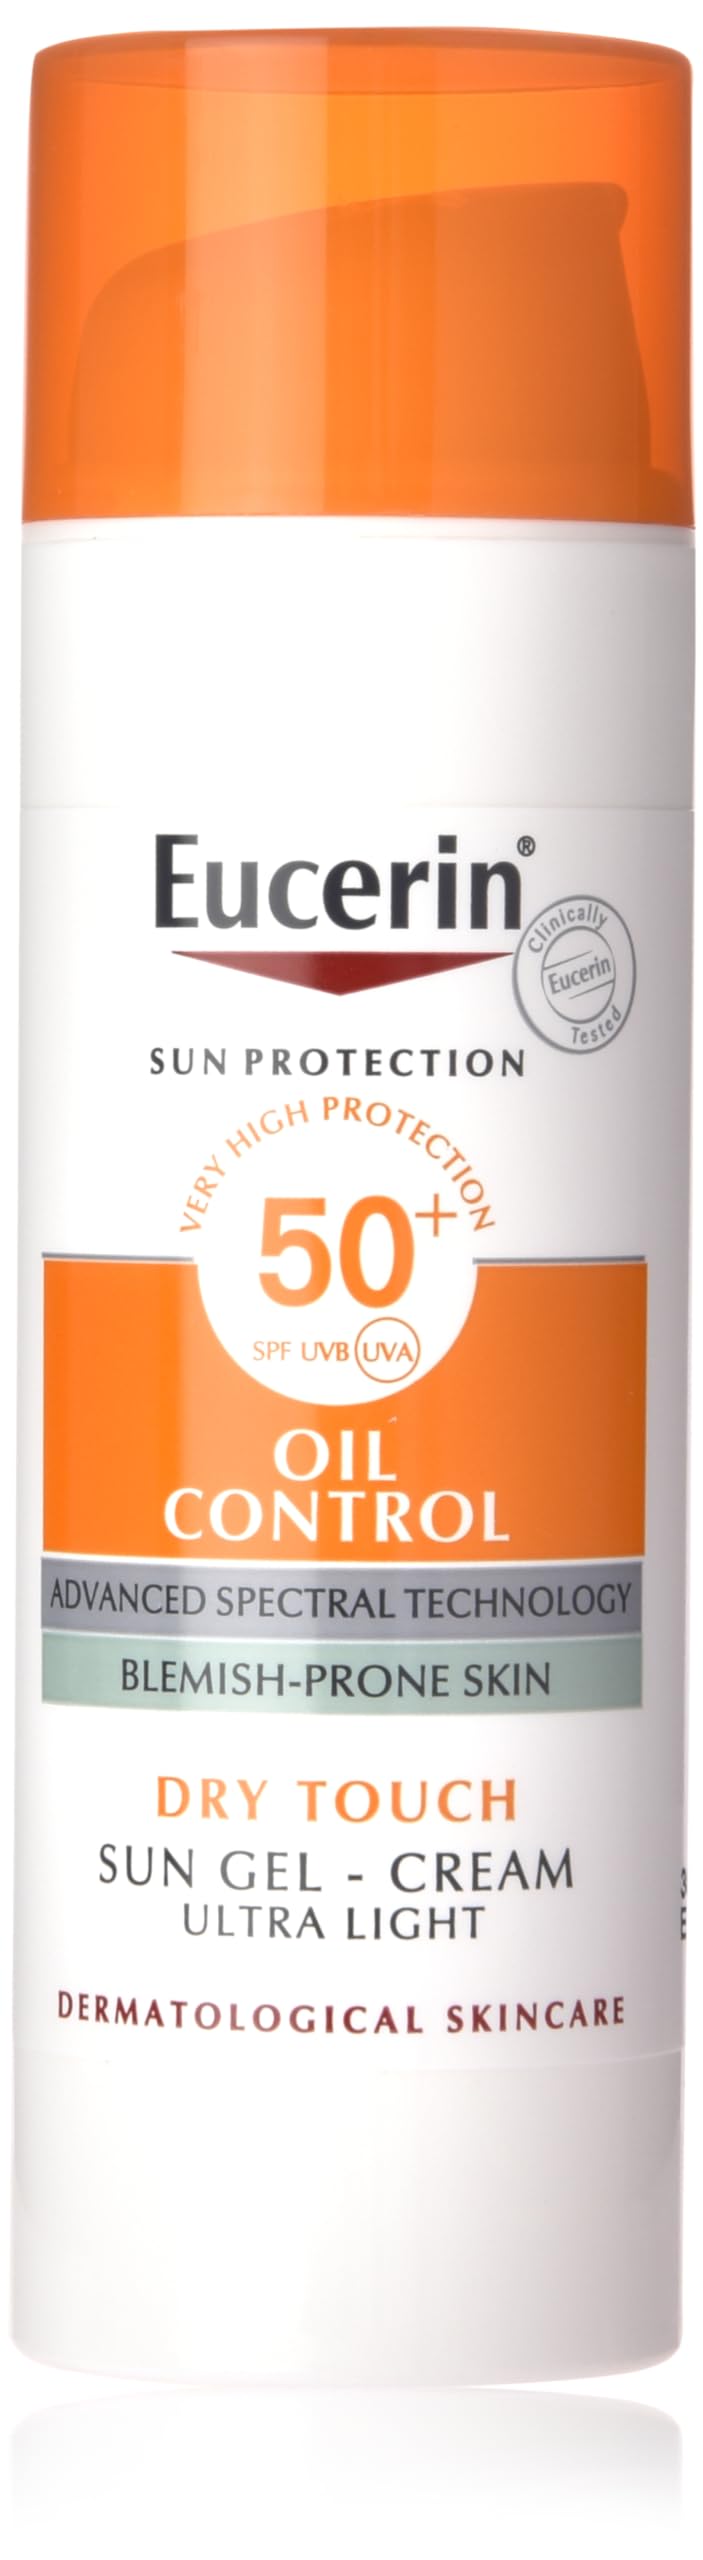 Eucerin Face Sunscreen Oil Control Gel-Cream Dry Touch, High UVA/UVB Protection, SPF 50+, Light Texture Sun Protection, Suitable Under Make-Up